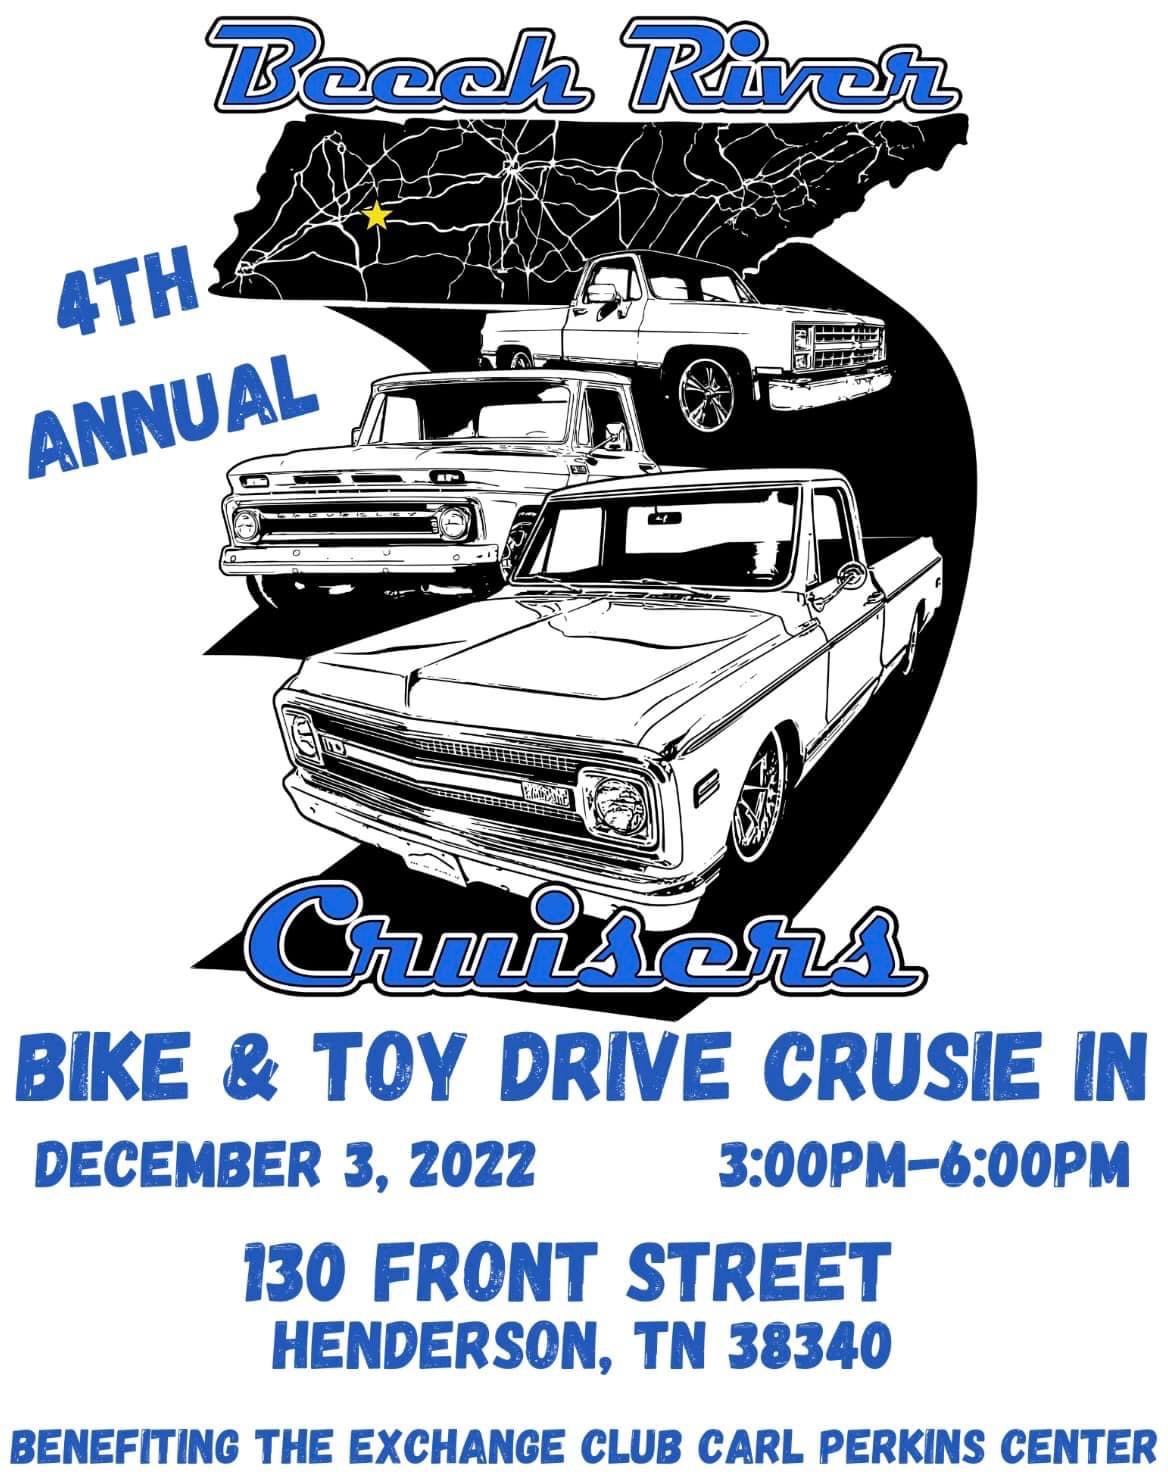 ‘Cruise In’ bike, toy drive to be held December 3